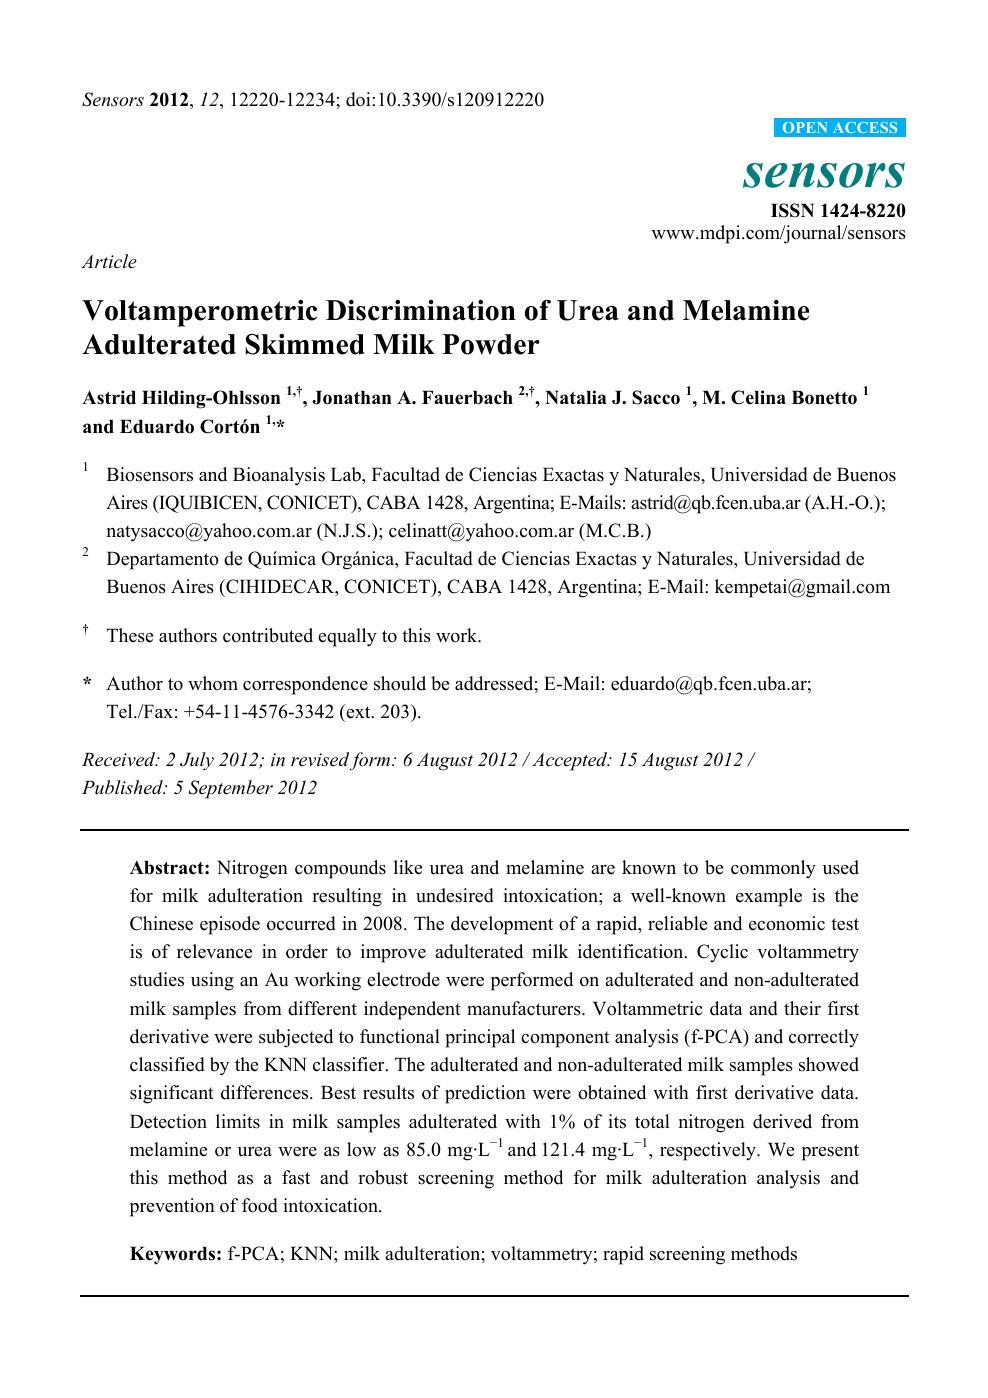 Voltamperometric Discrimination Of Urea And Melamine Adulterated Skimmed Milk Powder Topic Of Research Paper In Chemical Sciences Download Scholarly Article Pdf And Read For Free On Cyberleninka Open Science Hub